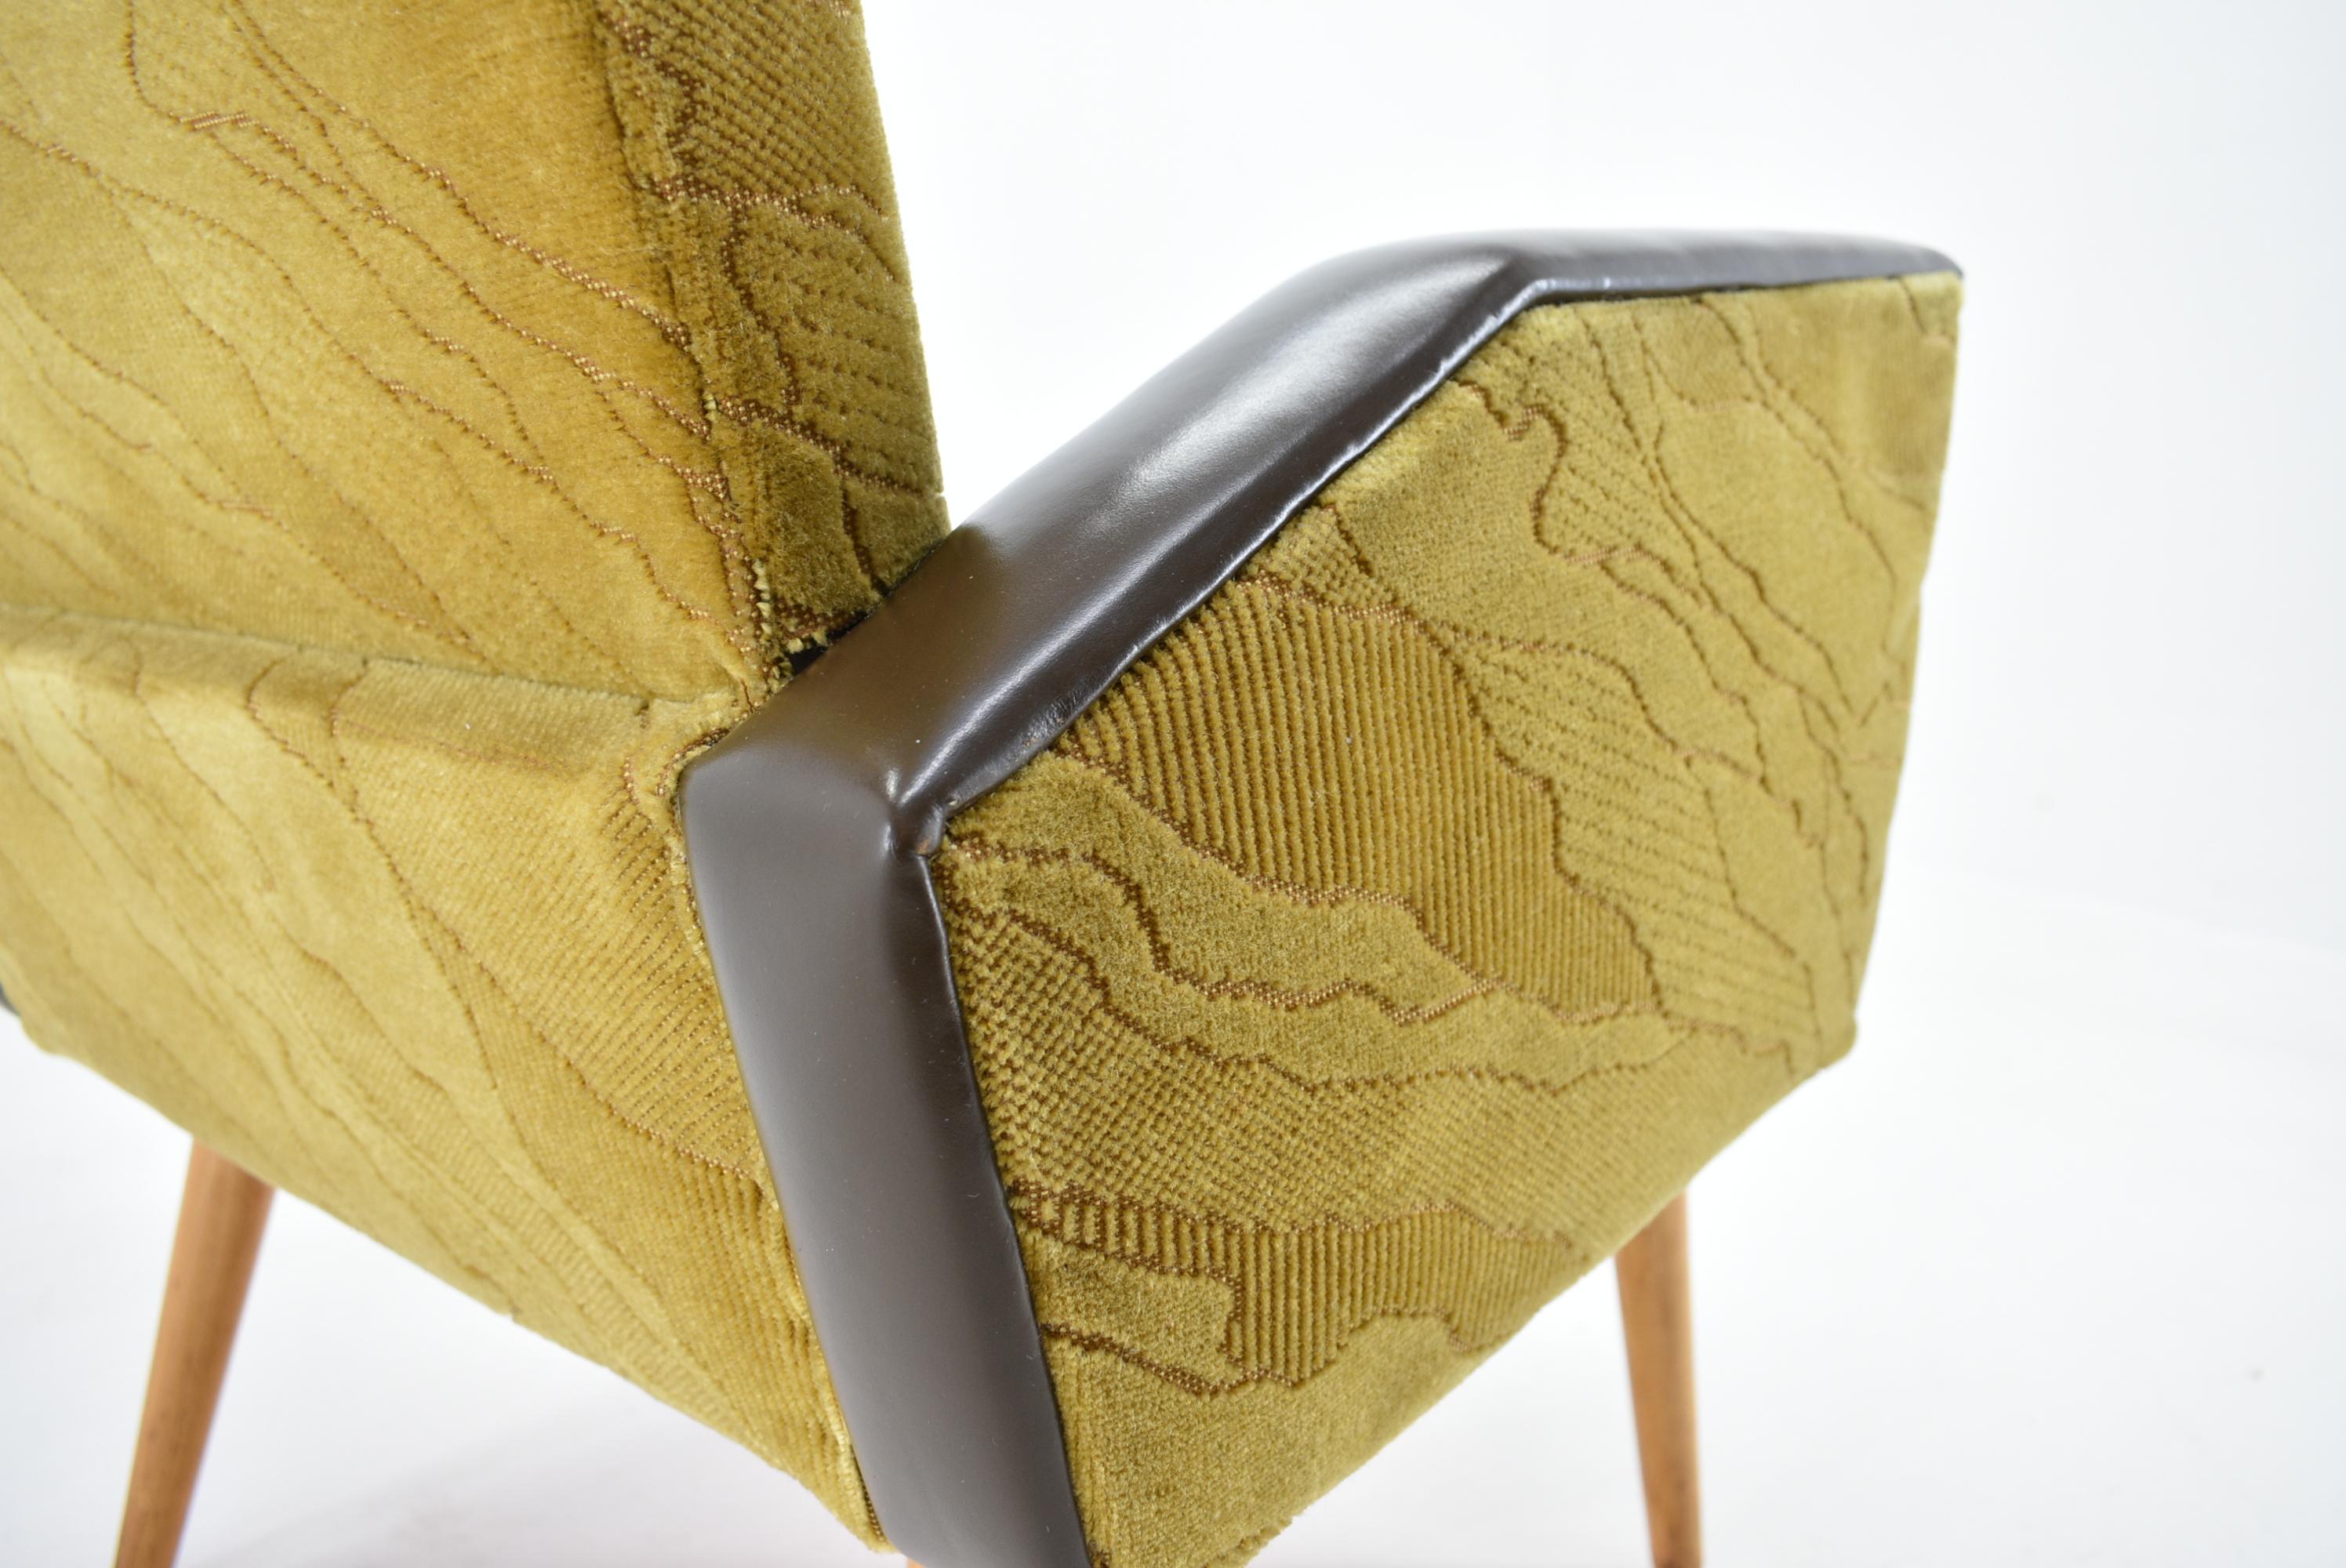 Midcentury Leather Armchairs Designed by Miroslav Navrátil, 1970s For Sale 5